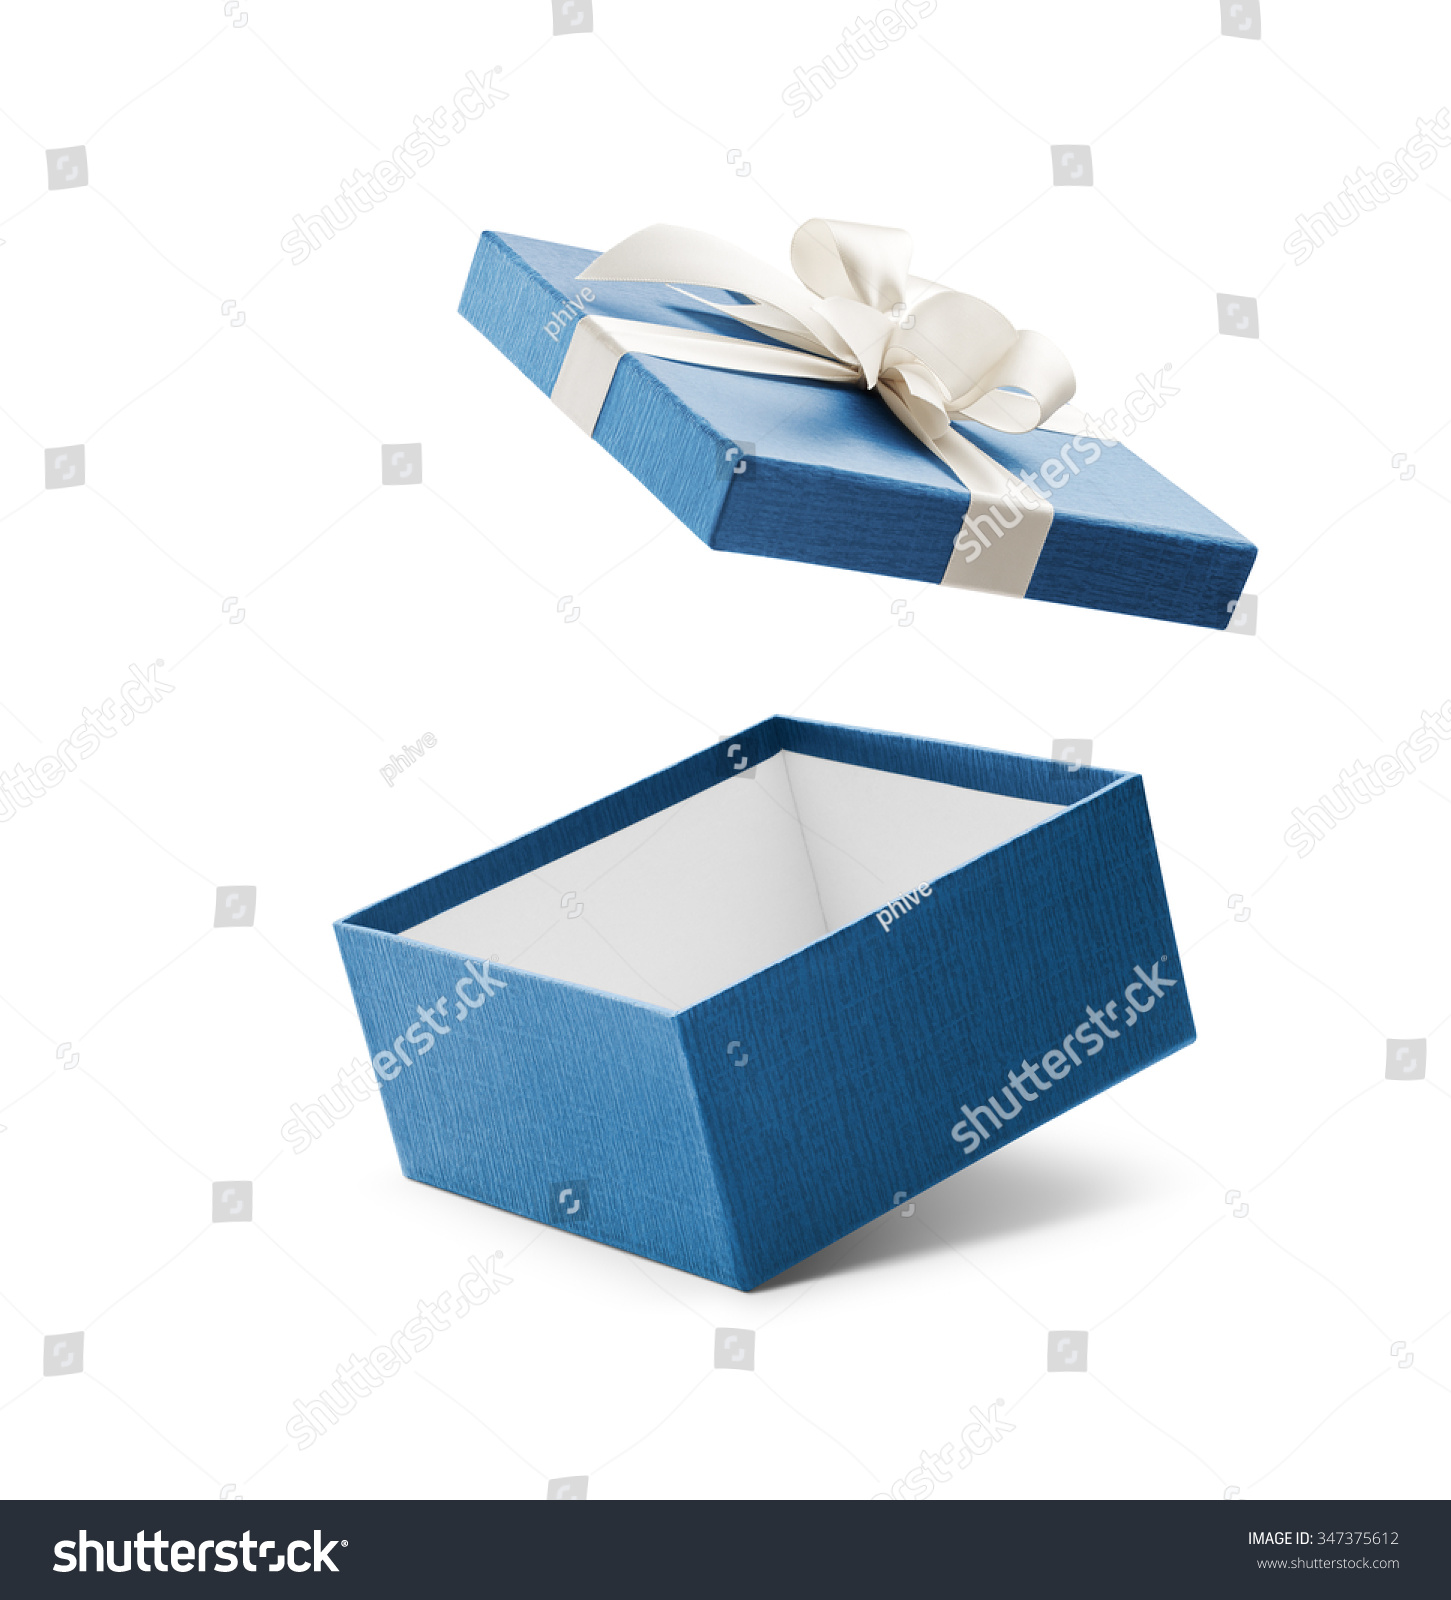 Blue open gift box with white bow isolated on white #347375612